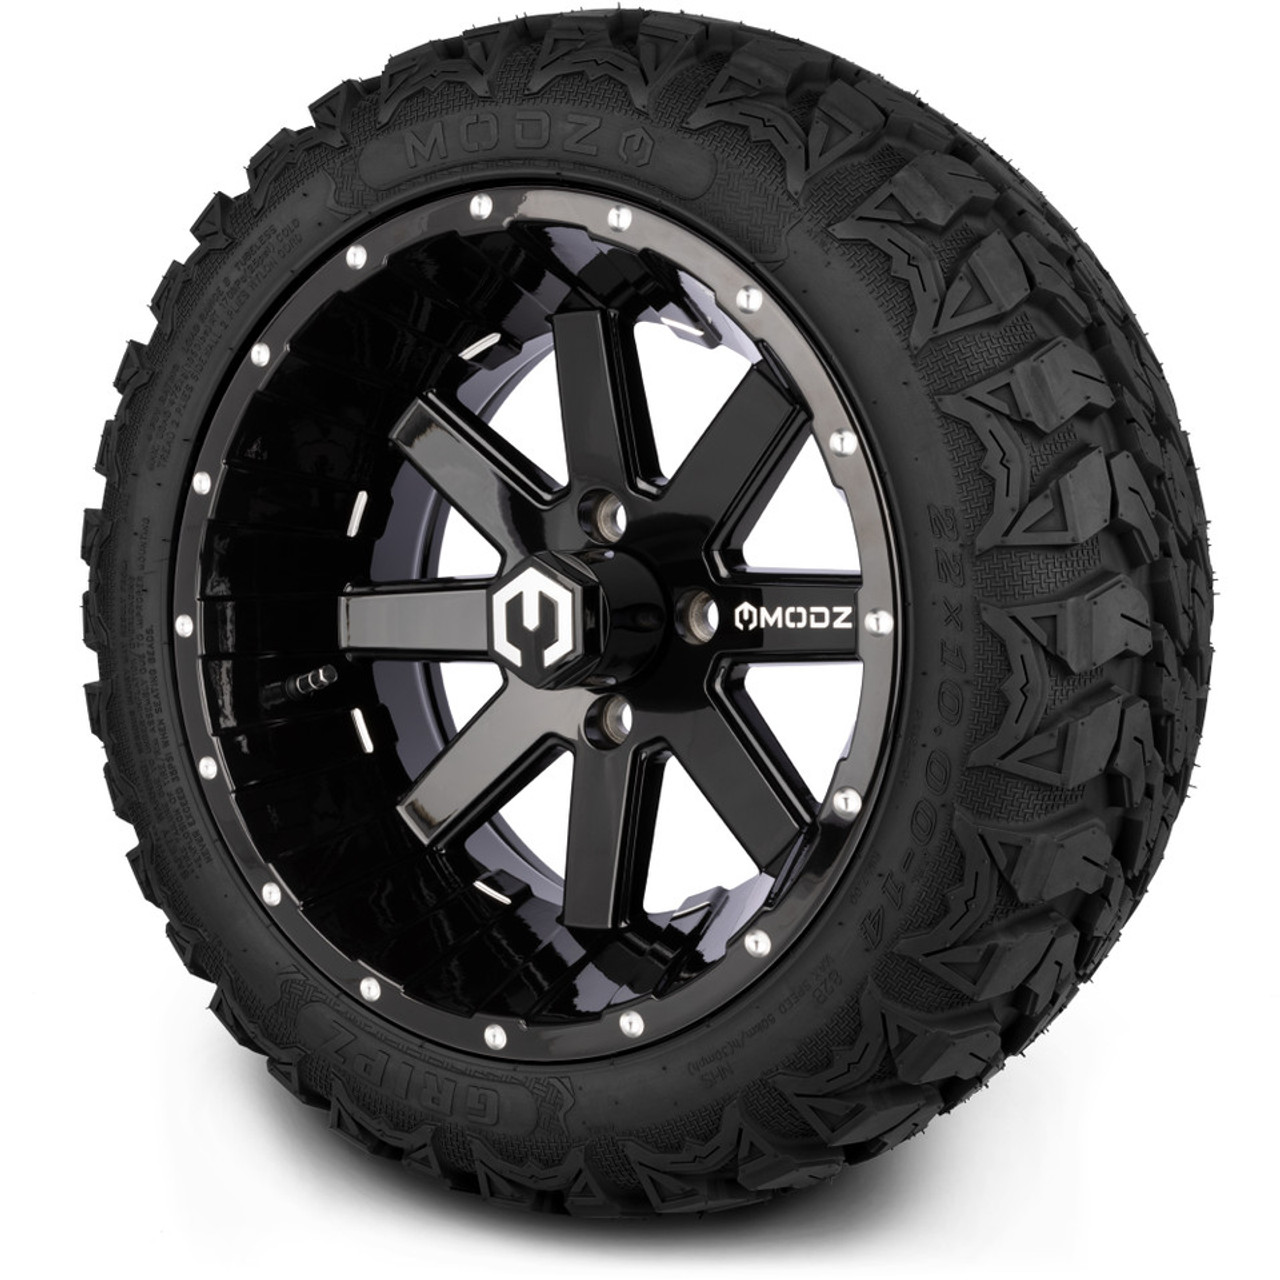 MODZ 14" Assault Glossy Black with Ball Mill Wheels & Off-Road Tires Combo